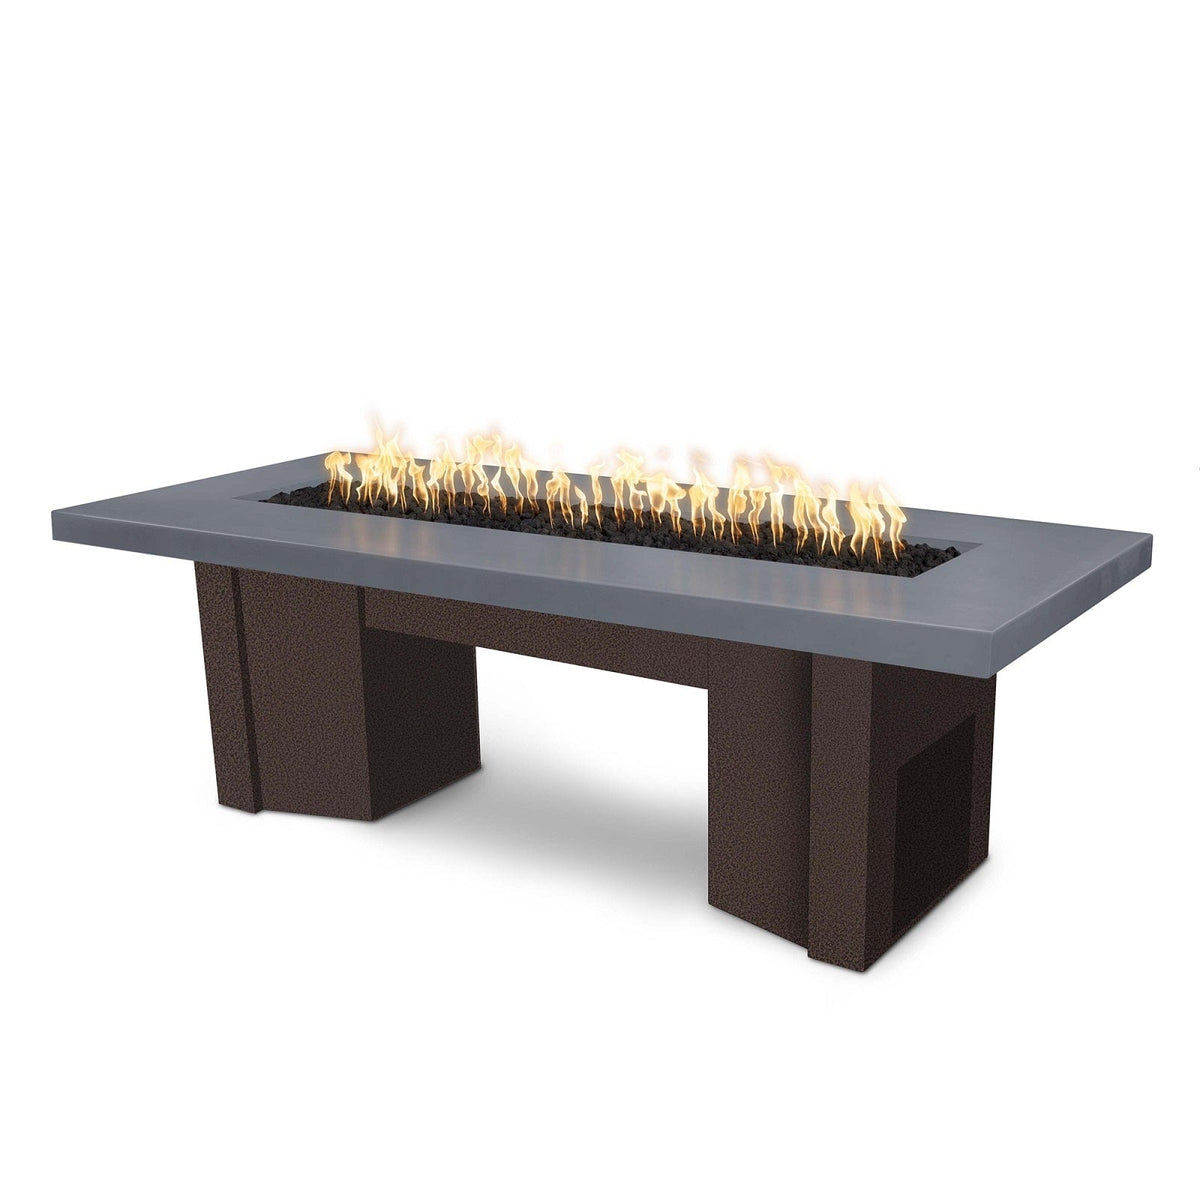 The Outdoor Plus Fire Features Gray (-GRY) / Copper Vein Powder Coated Steel (-CPV) The Outdoor Plus 60&quot; Alameda Fire Table Smooth Concrete in Liquid Propane - 12V Electronic Ignition / OPT-ALMGFRC60E12V-LP